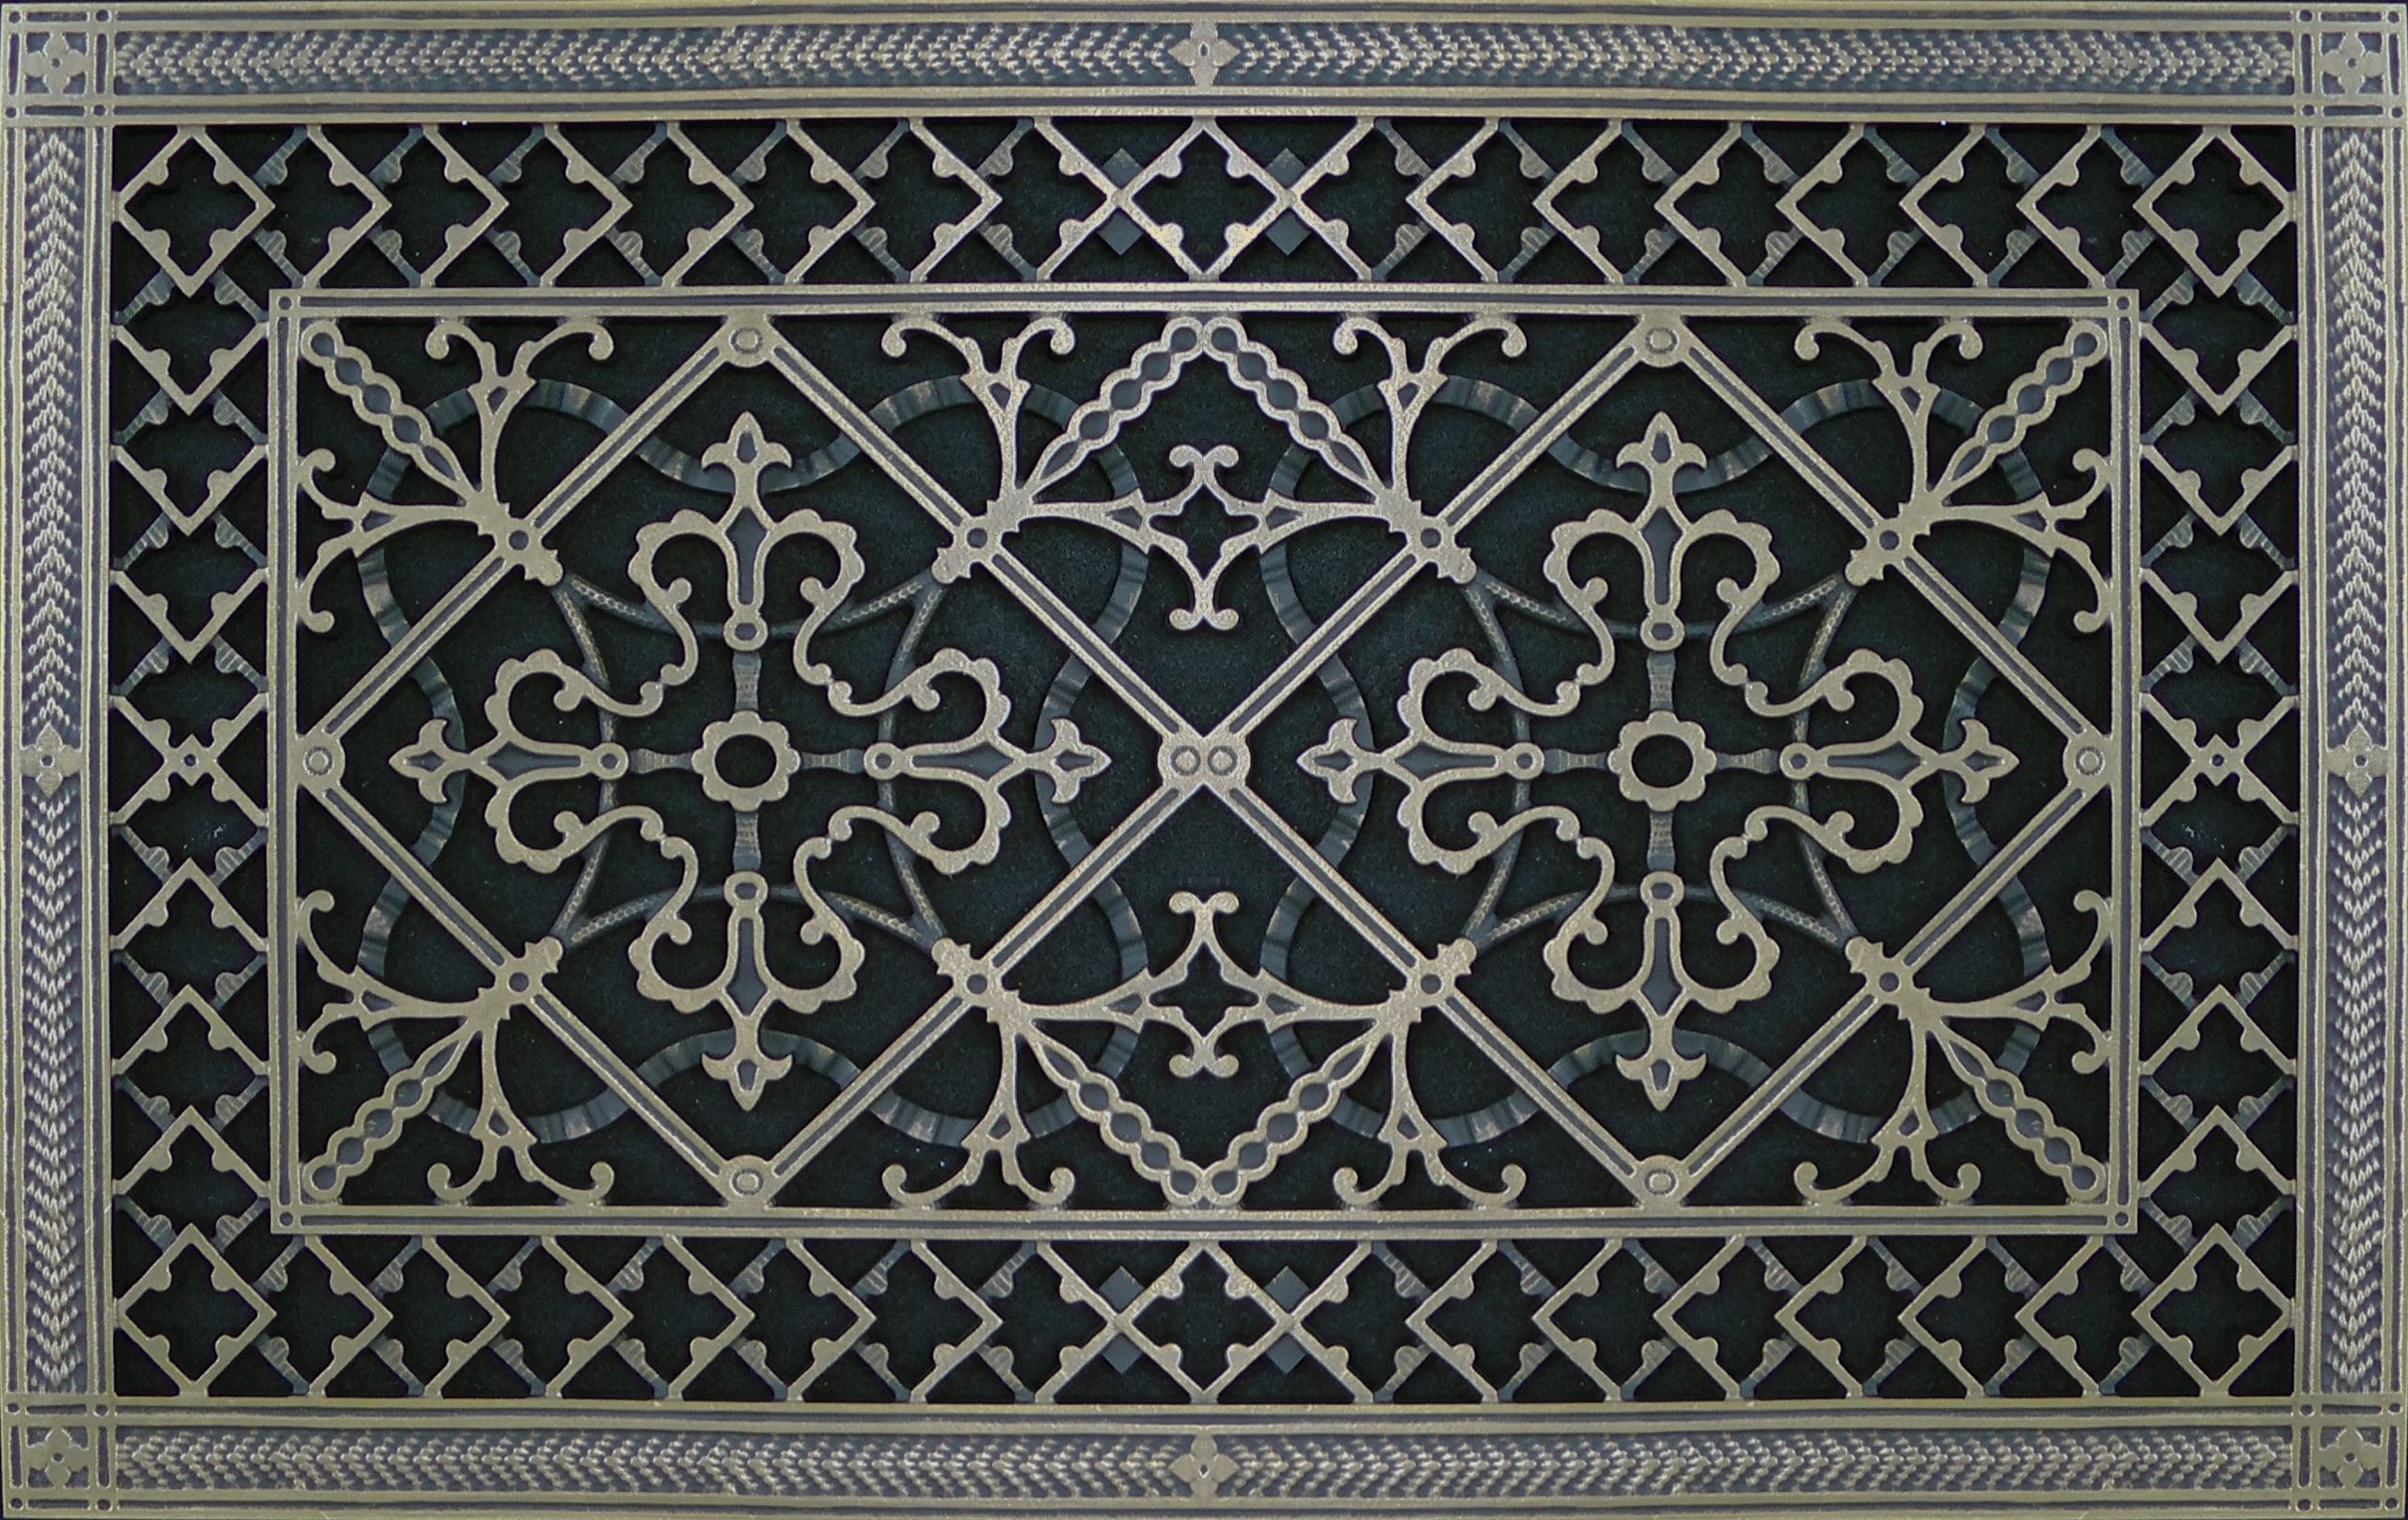 Decorative Vent Cover in Arts and Crafts Style 14" x 24"